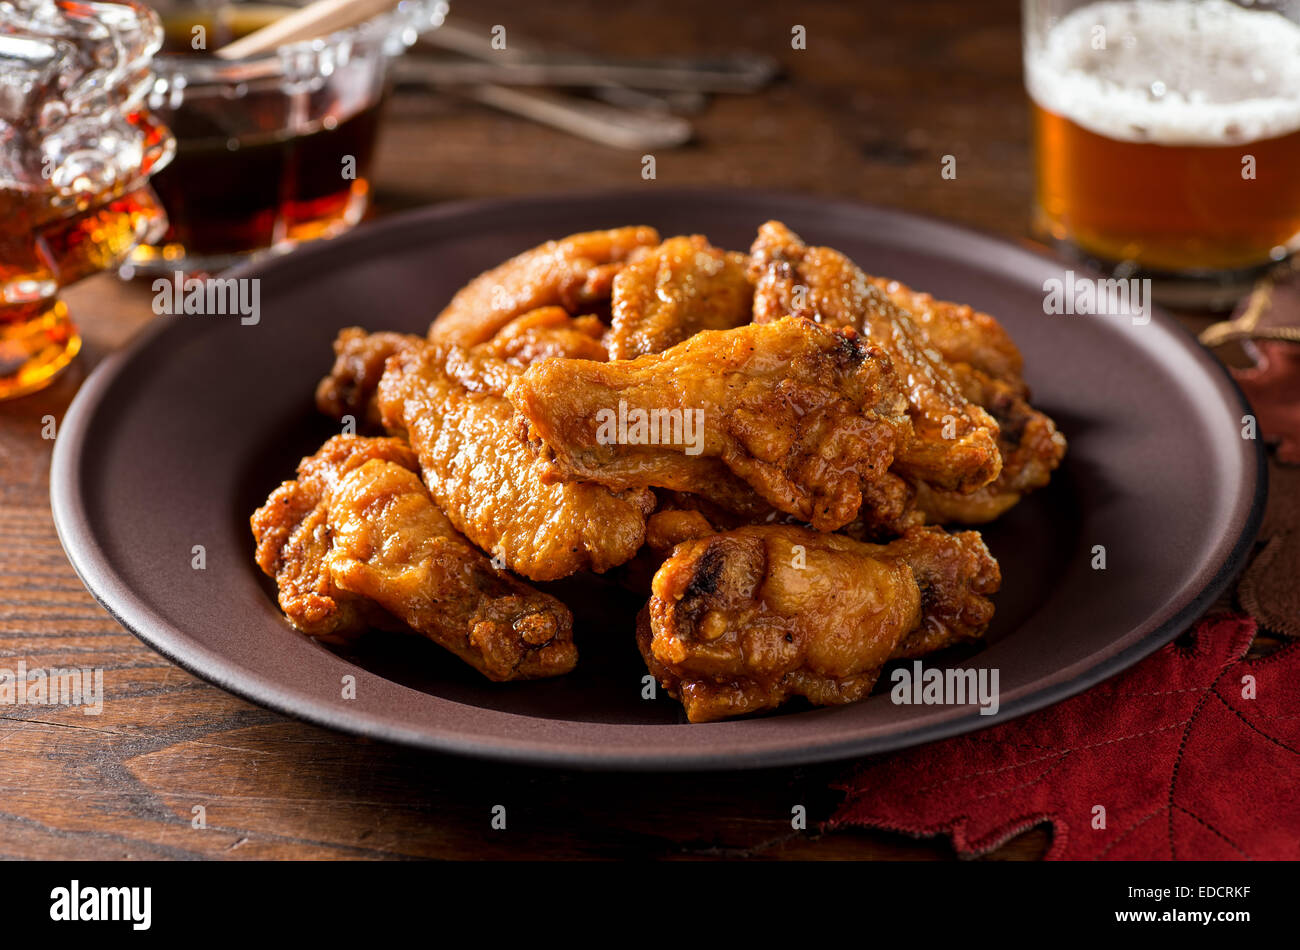 A plate of delicious chicken wings. Stock Photo